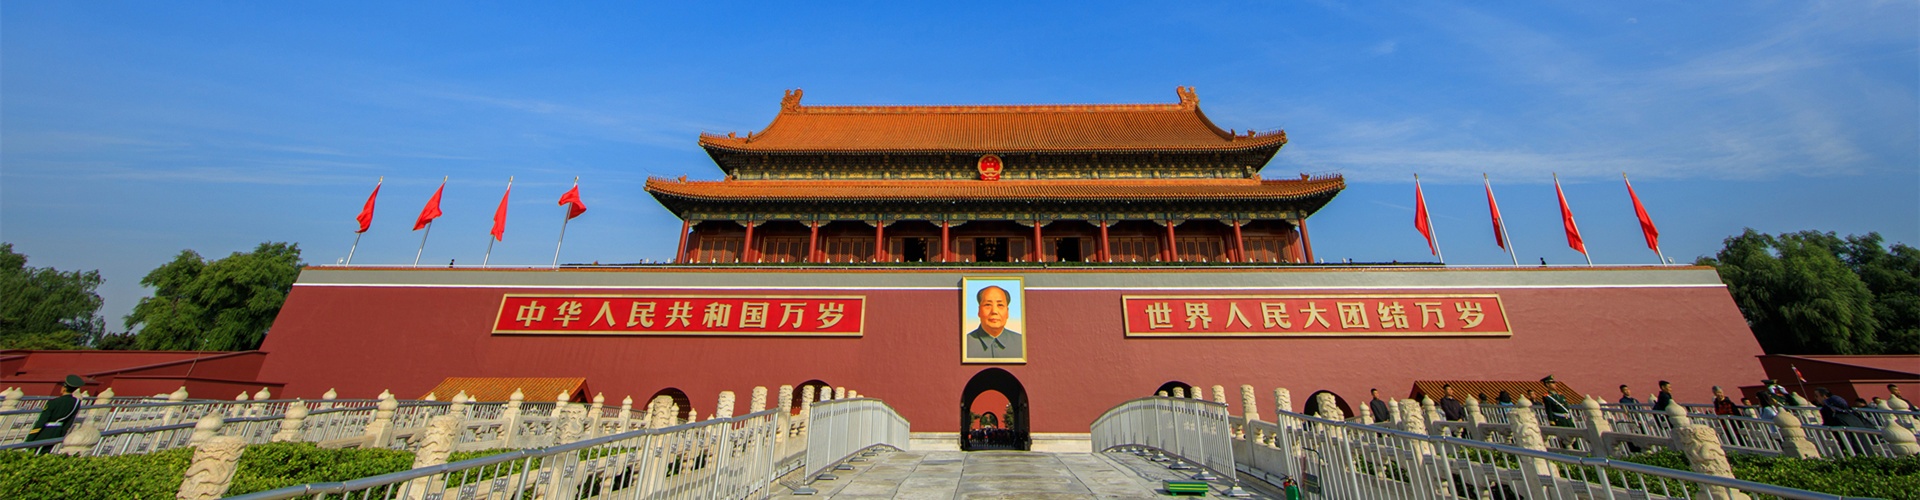 Tian'anmen Square - the Witness of the Revolutionary Soul